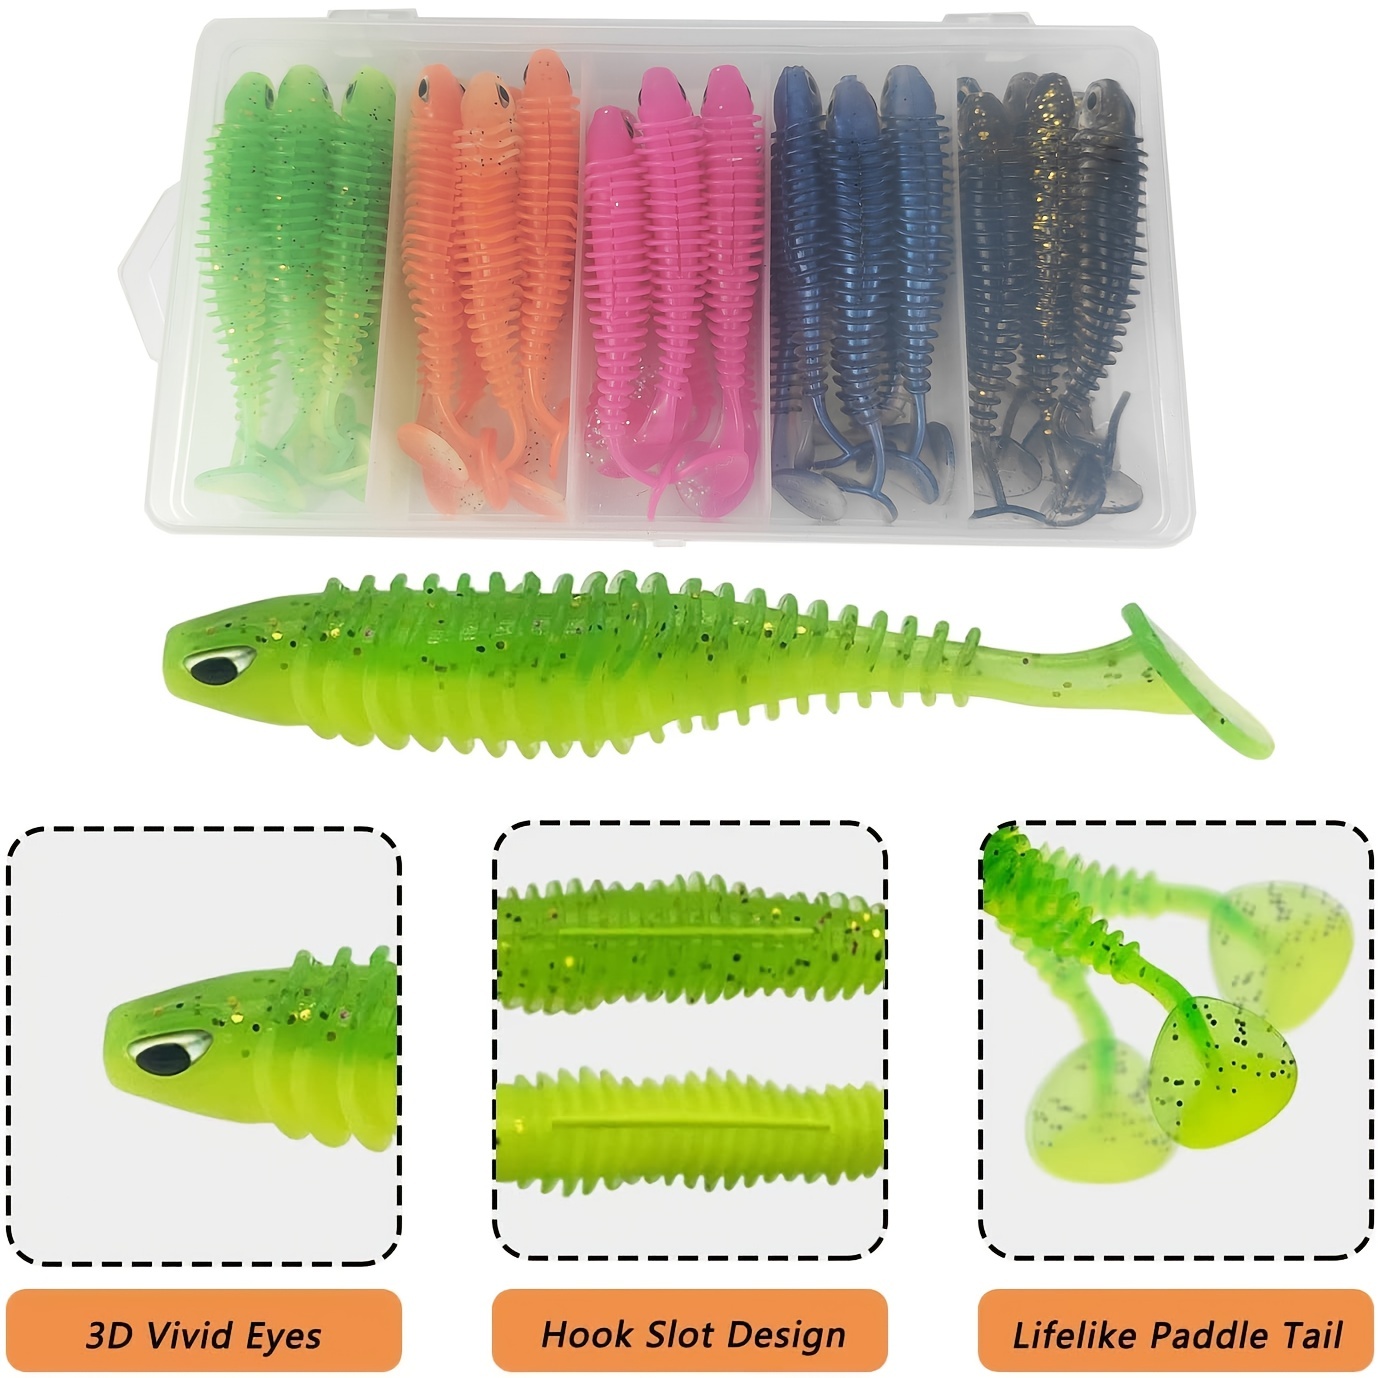 30/40pcs 2.56in/3.15in Artificial Plastic Soft Fishing Lures, 6.5cm/8cm  Bionic Paddle Tail Ribbed Swimbaits Lure For Bass Trout Walleye Crappie